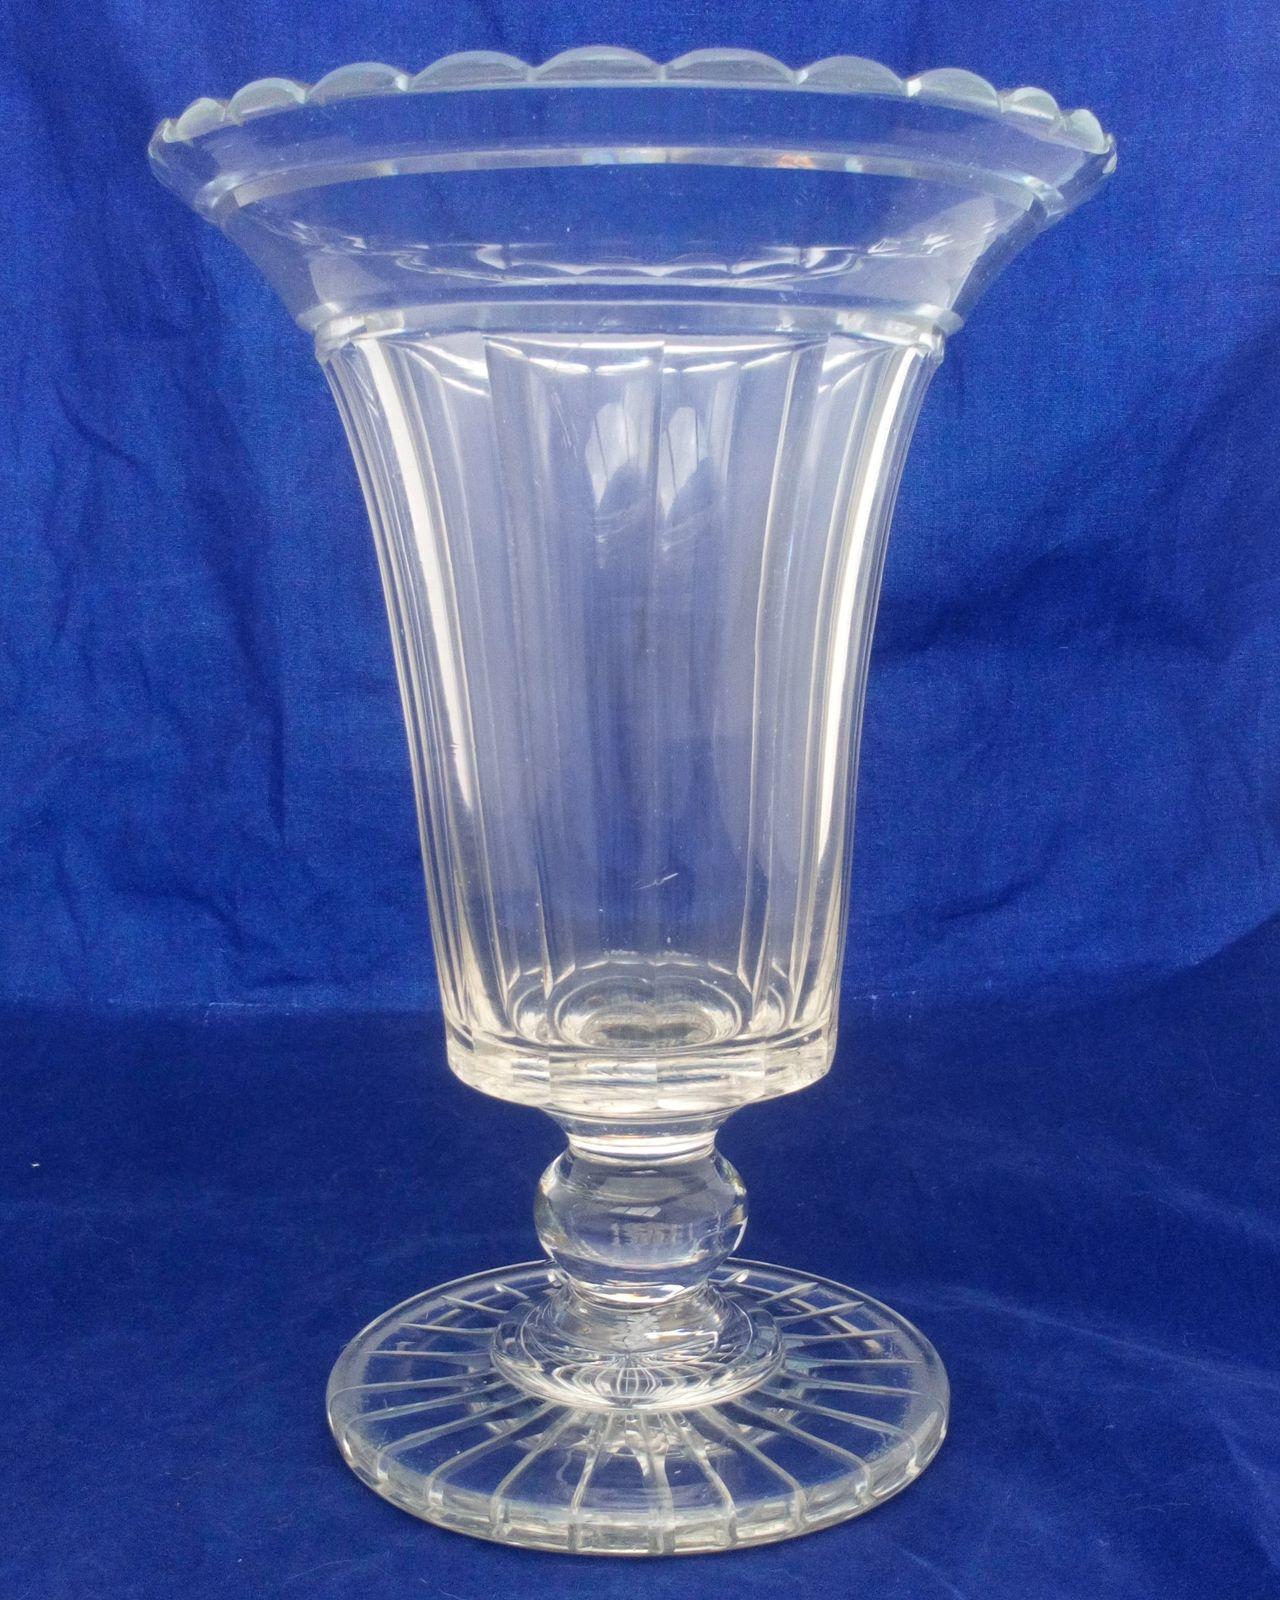 Antique Victorian large glass celery Vase with a scallop cut everted rimed rim, a panel cut bucket shaped bowl on a ball knopped stem and plain star cut foot, circa 1860.